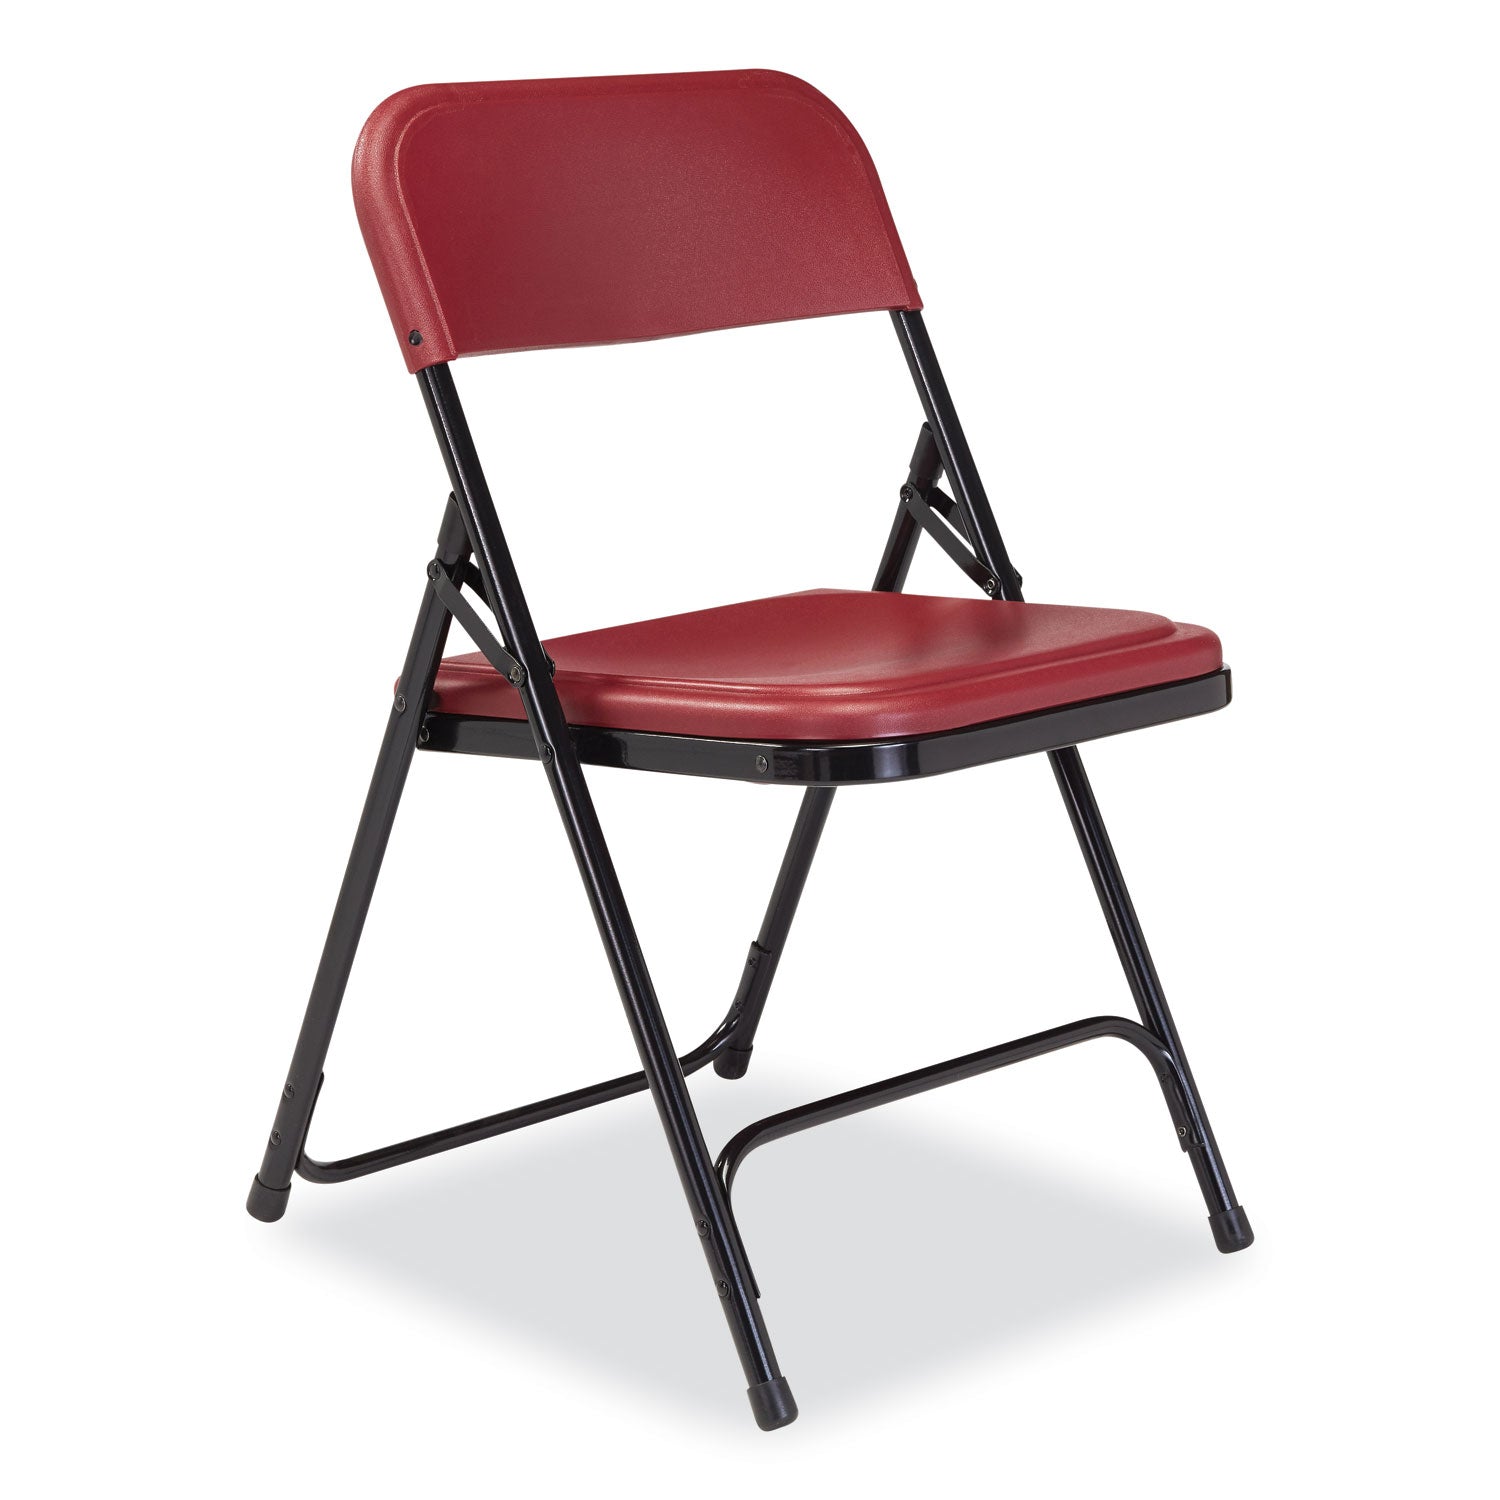 800-series-plastic-folding-chair-supports-500-lb-18-seat-ht-burgundy-seat-back-black-base-4-ct-ships-in-1-3-bus-days_nps818 - 2